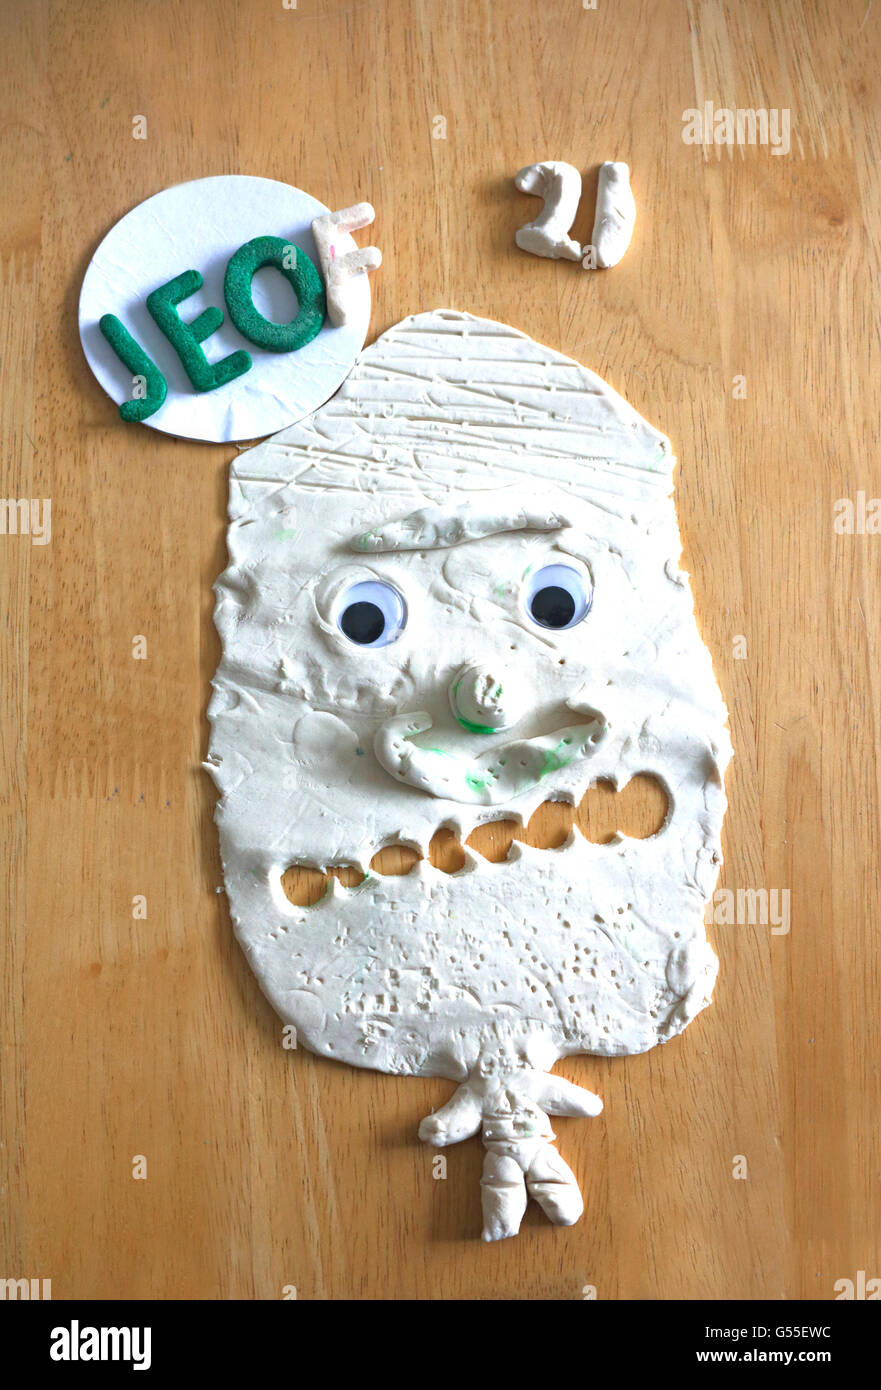 A funny face modelled in play dough on a flat surface. Stock Photo